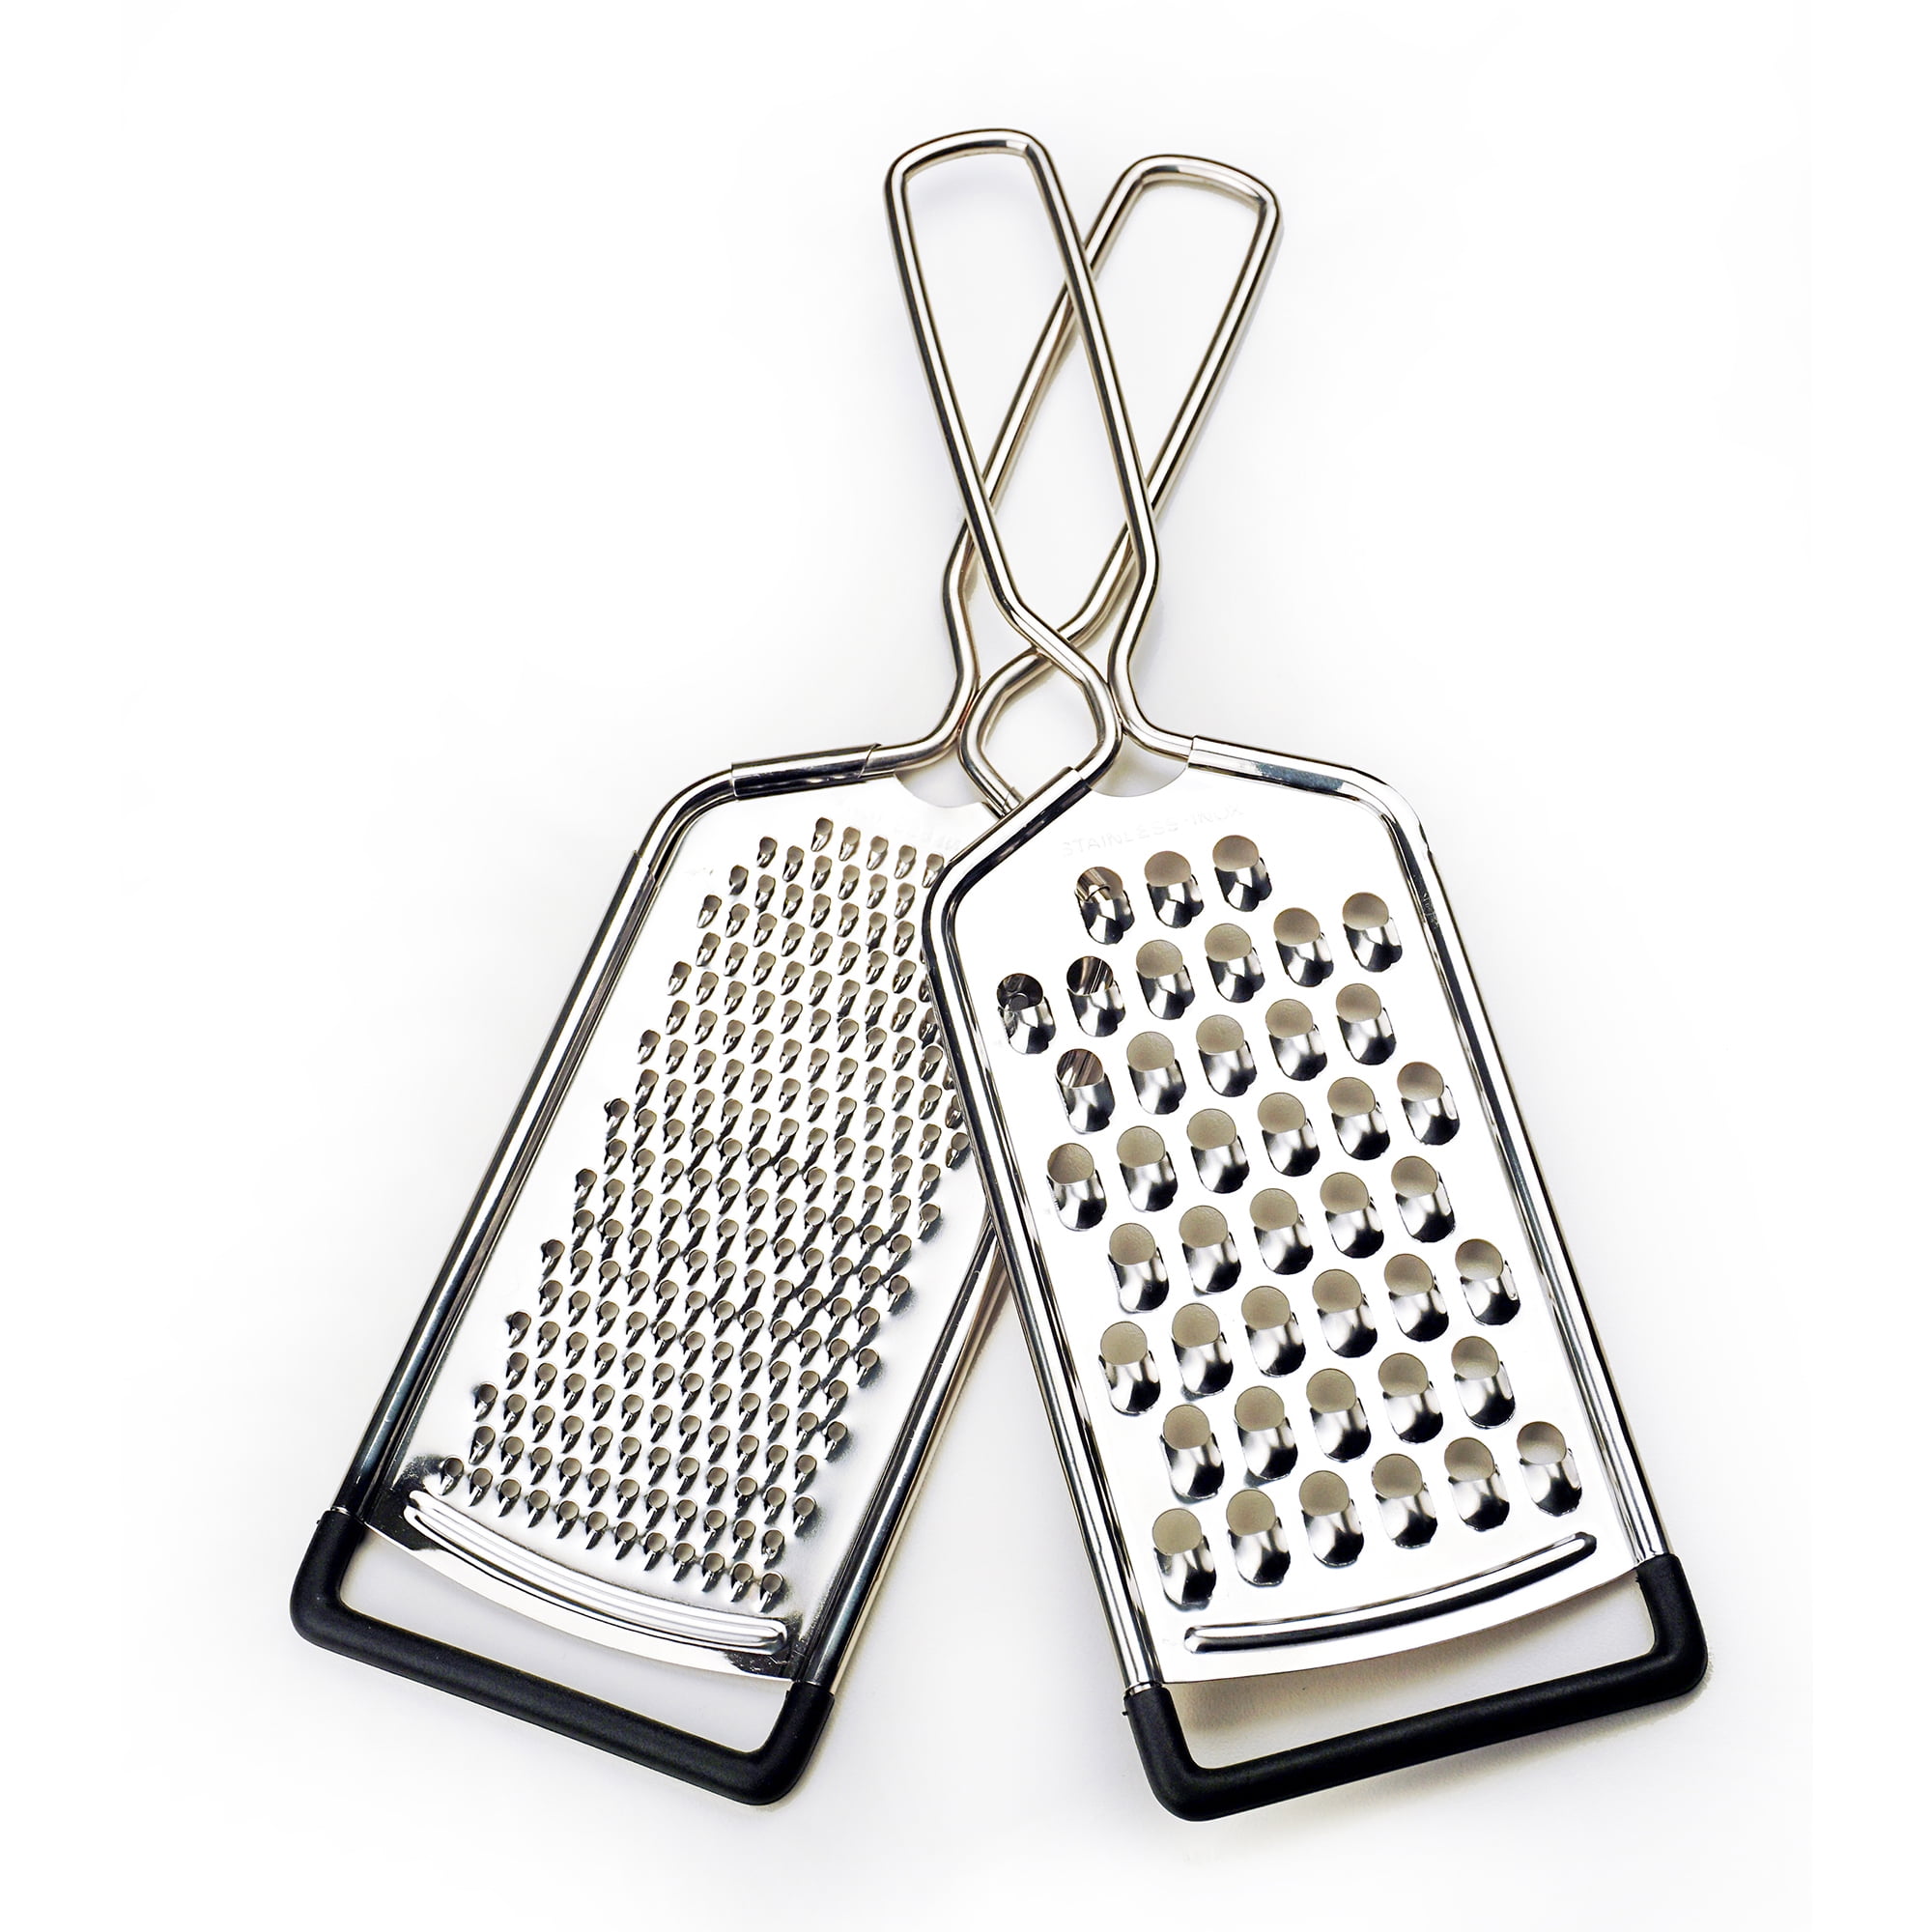 Mainstays Rotary Cheese Grater with Removable Stainless Steel